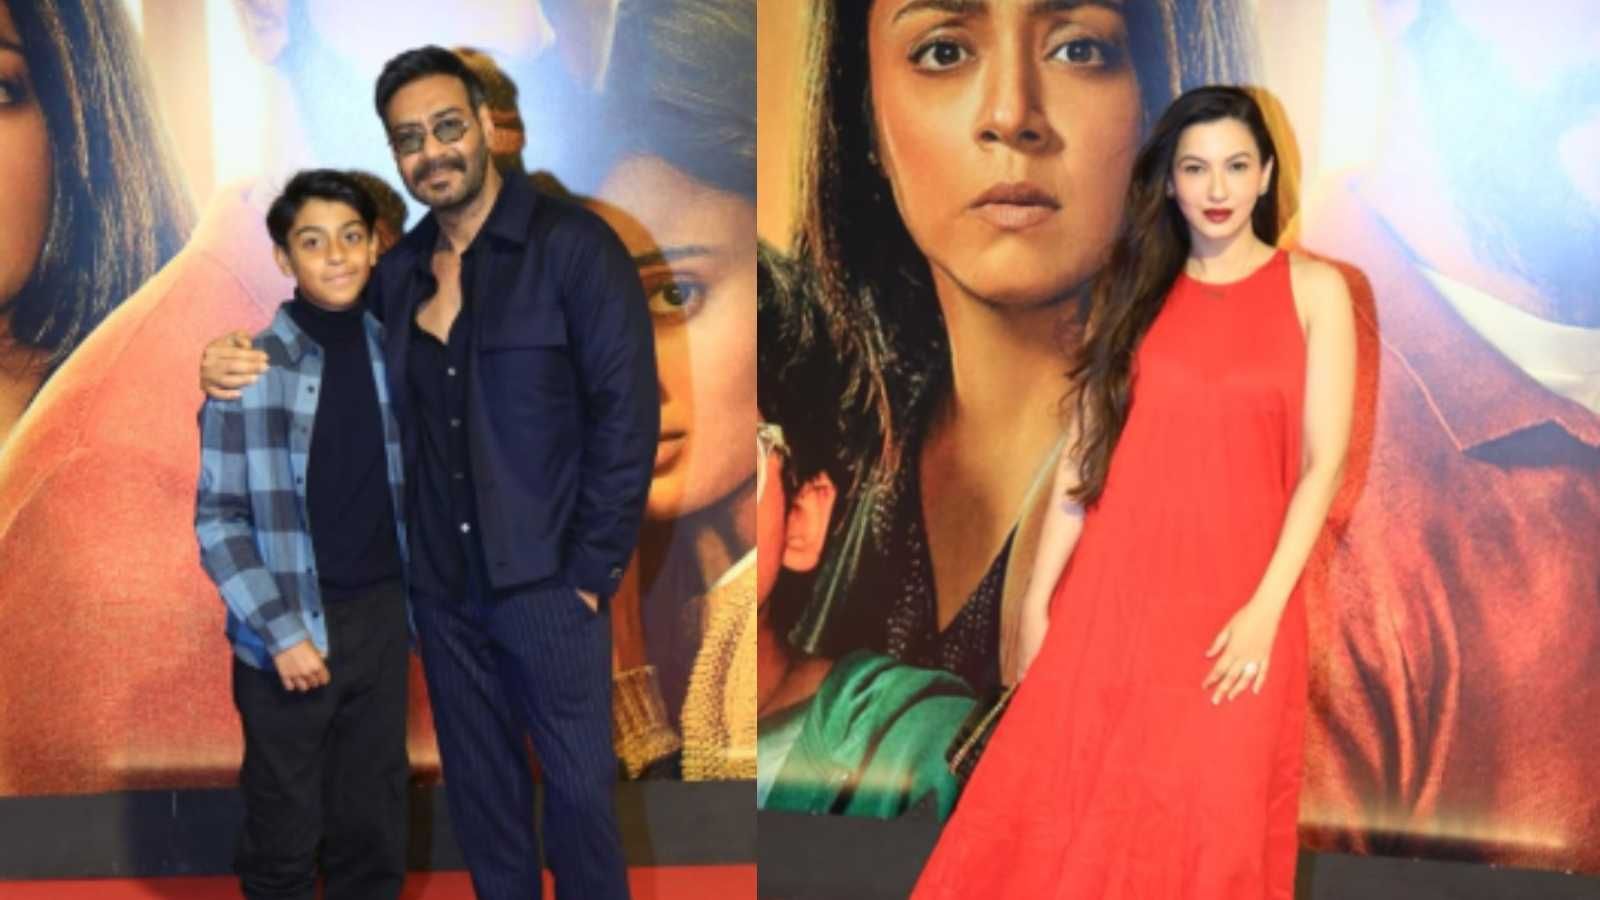 Ajay Devgn poses with Yug while Gauahar Khan lashes out at the paparazzi